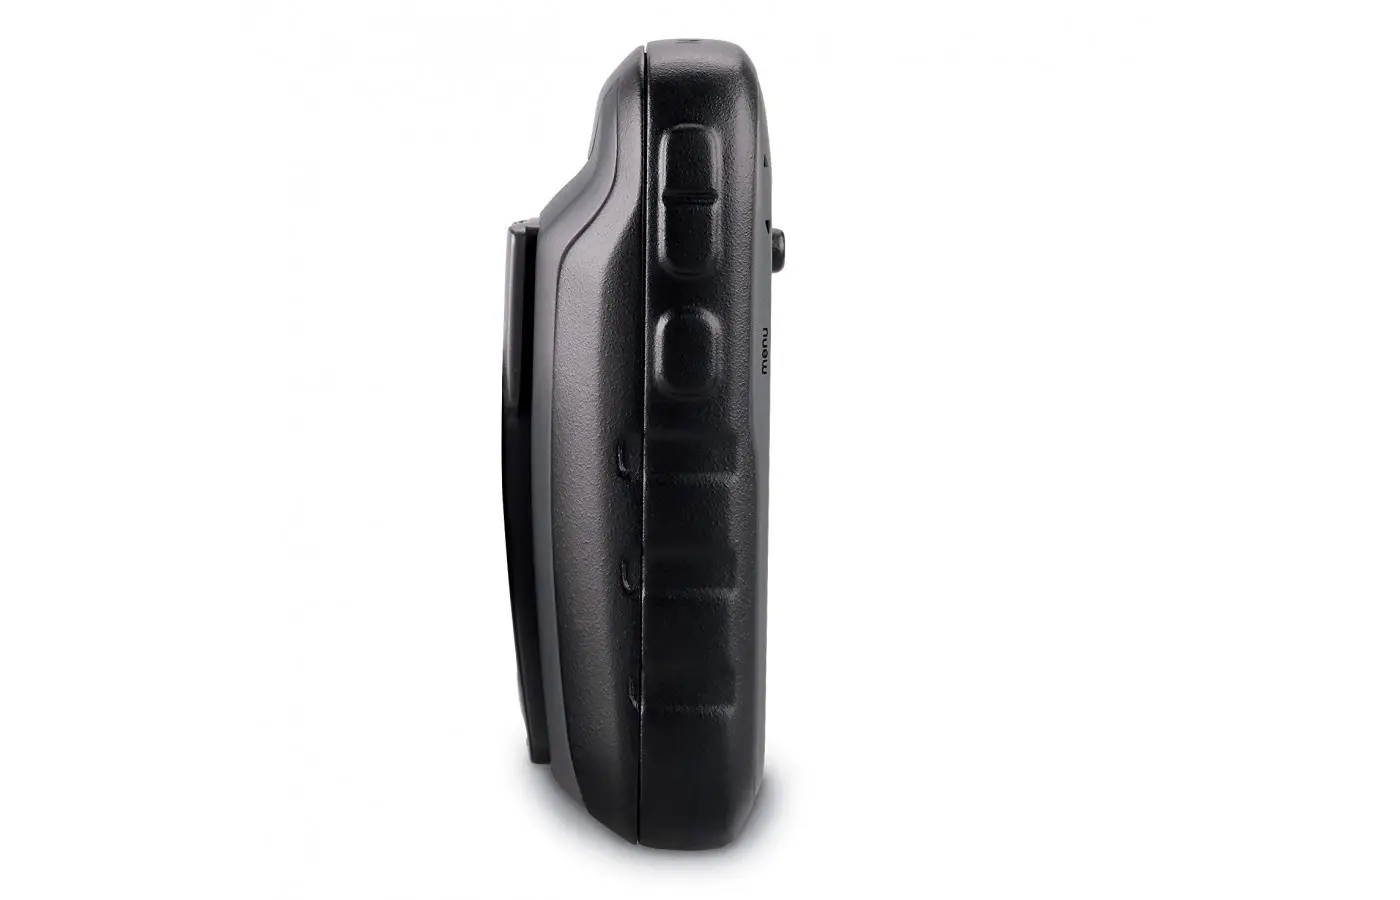 The Garmin eTrex 30 offers a highly durable body to offer a better longevity to the unit.